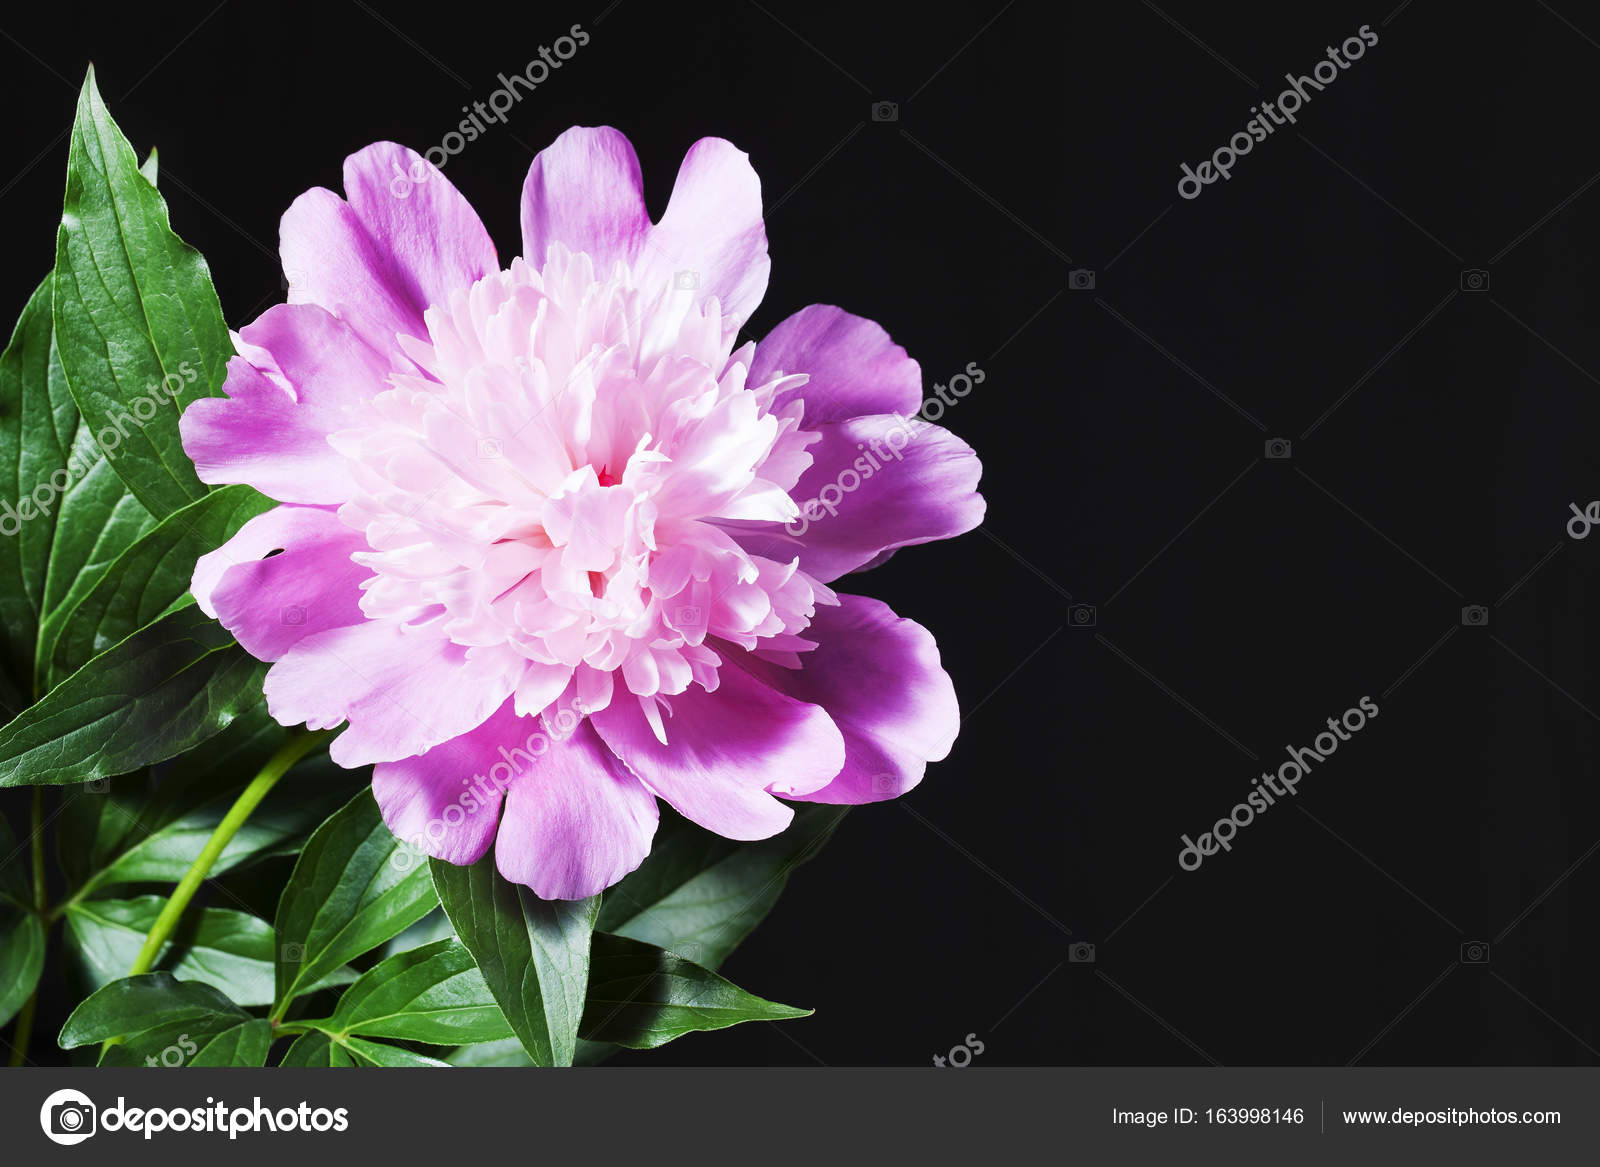 Pink Peony With Leaves In A Black Background Isolated On A Dark Stock Photo C Laimamilkinte Gmail Com 163998146